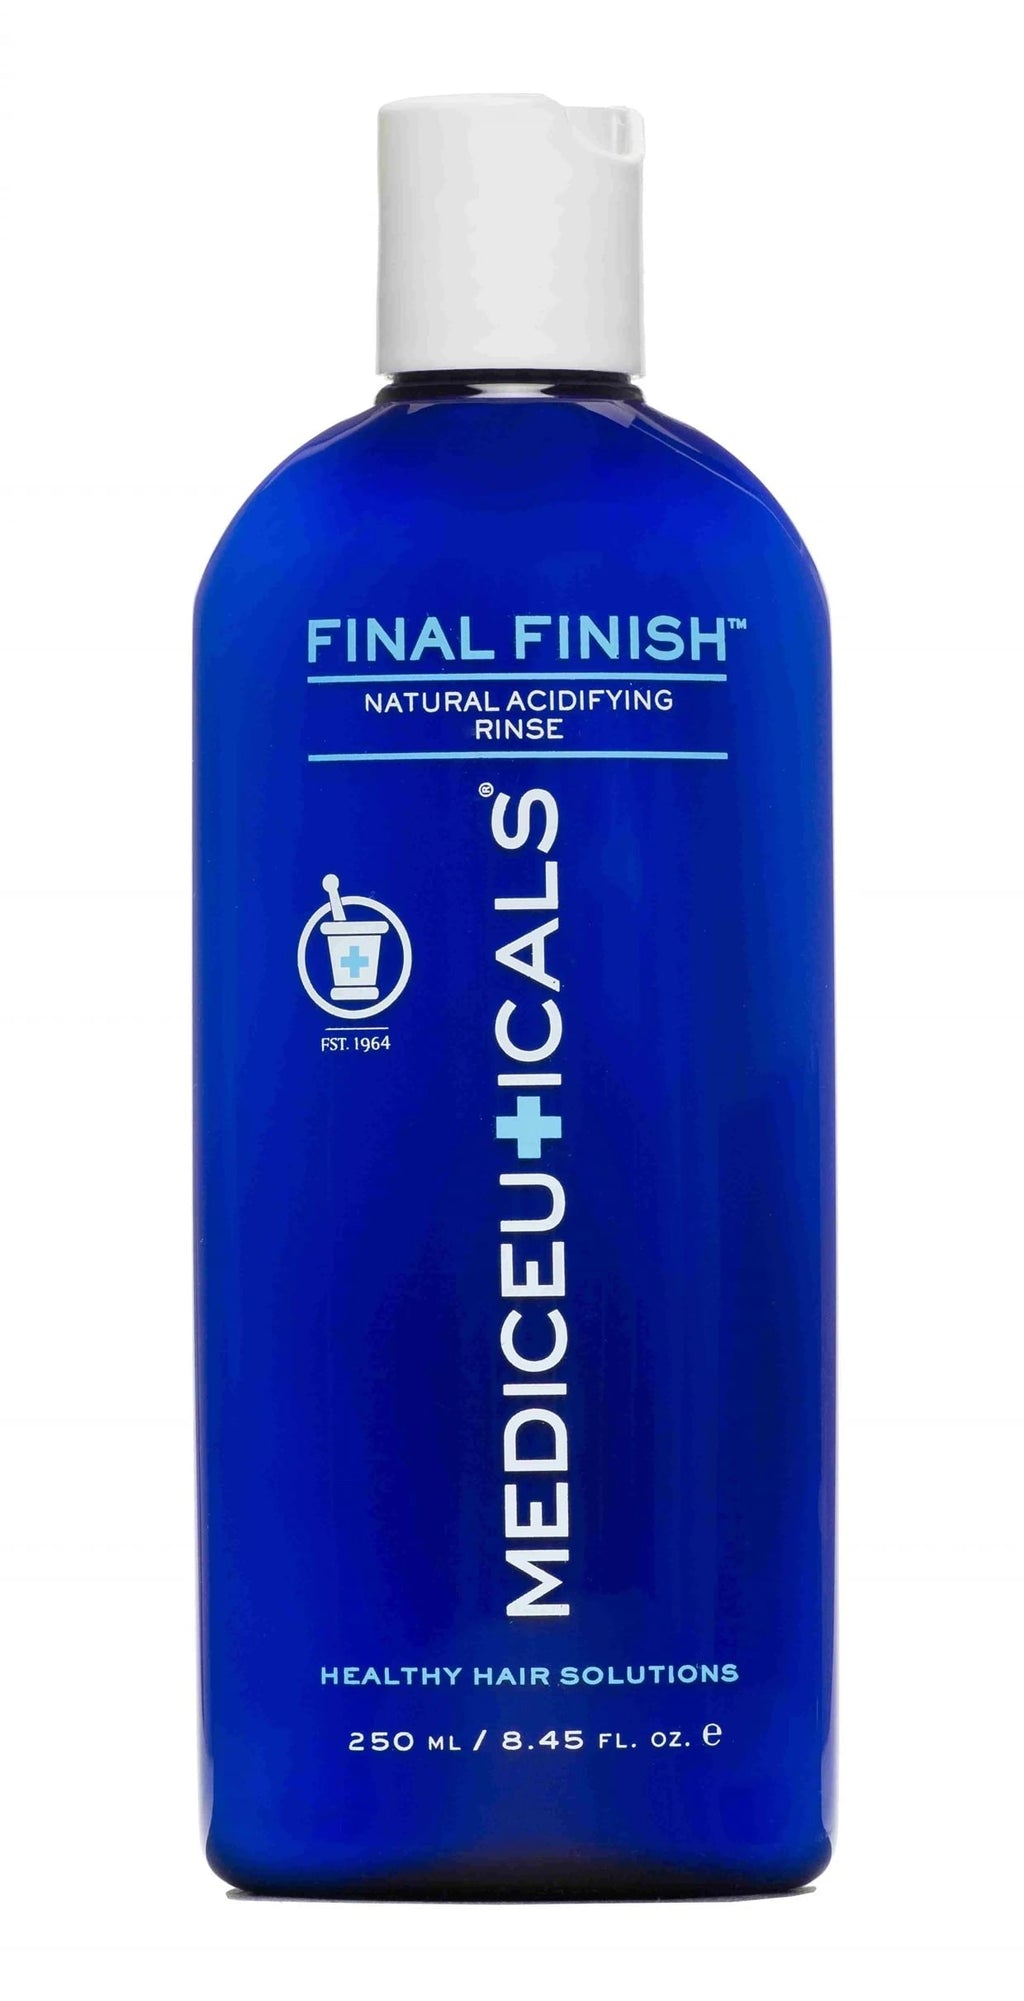 Mediceuticals Healthy Hair Solutions Final Finish Rinse Conditioner 250ml